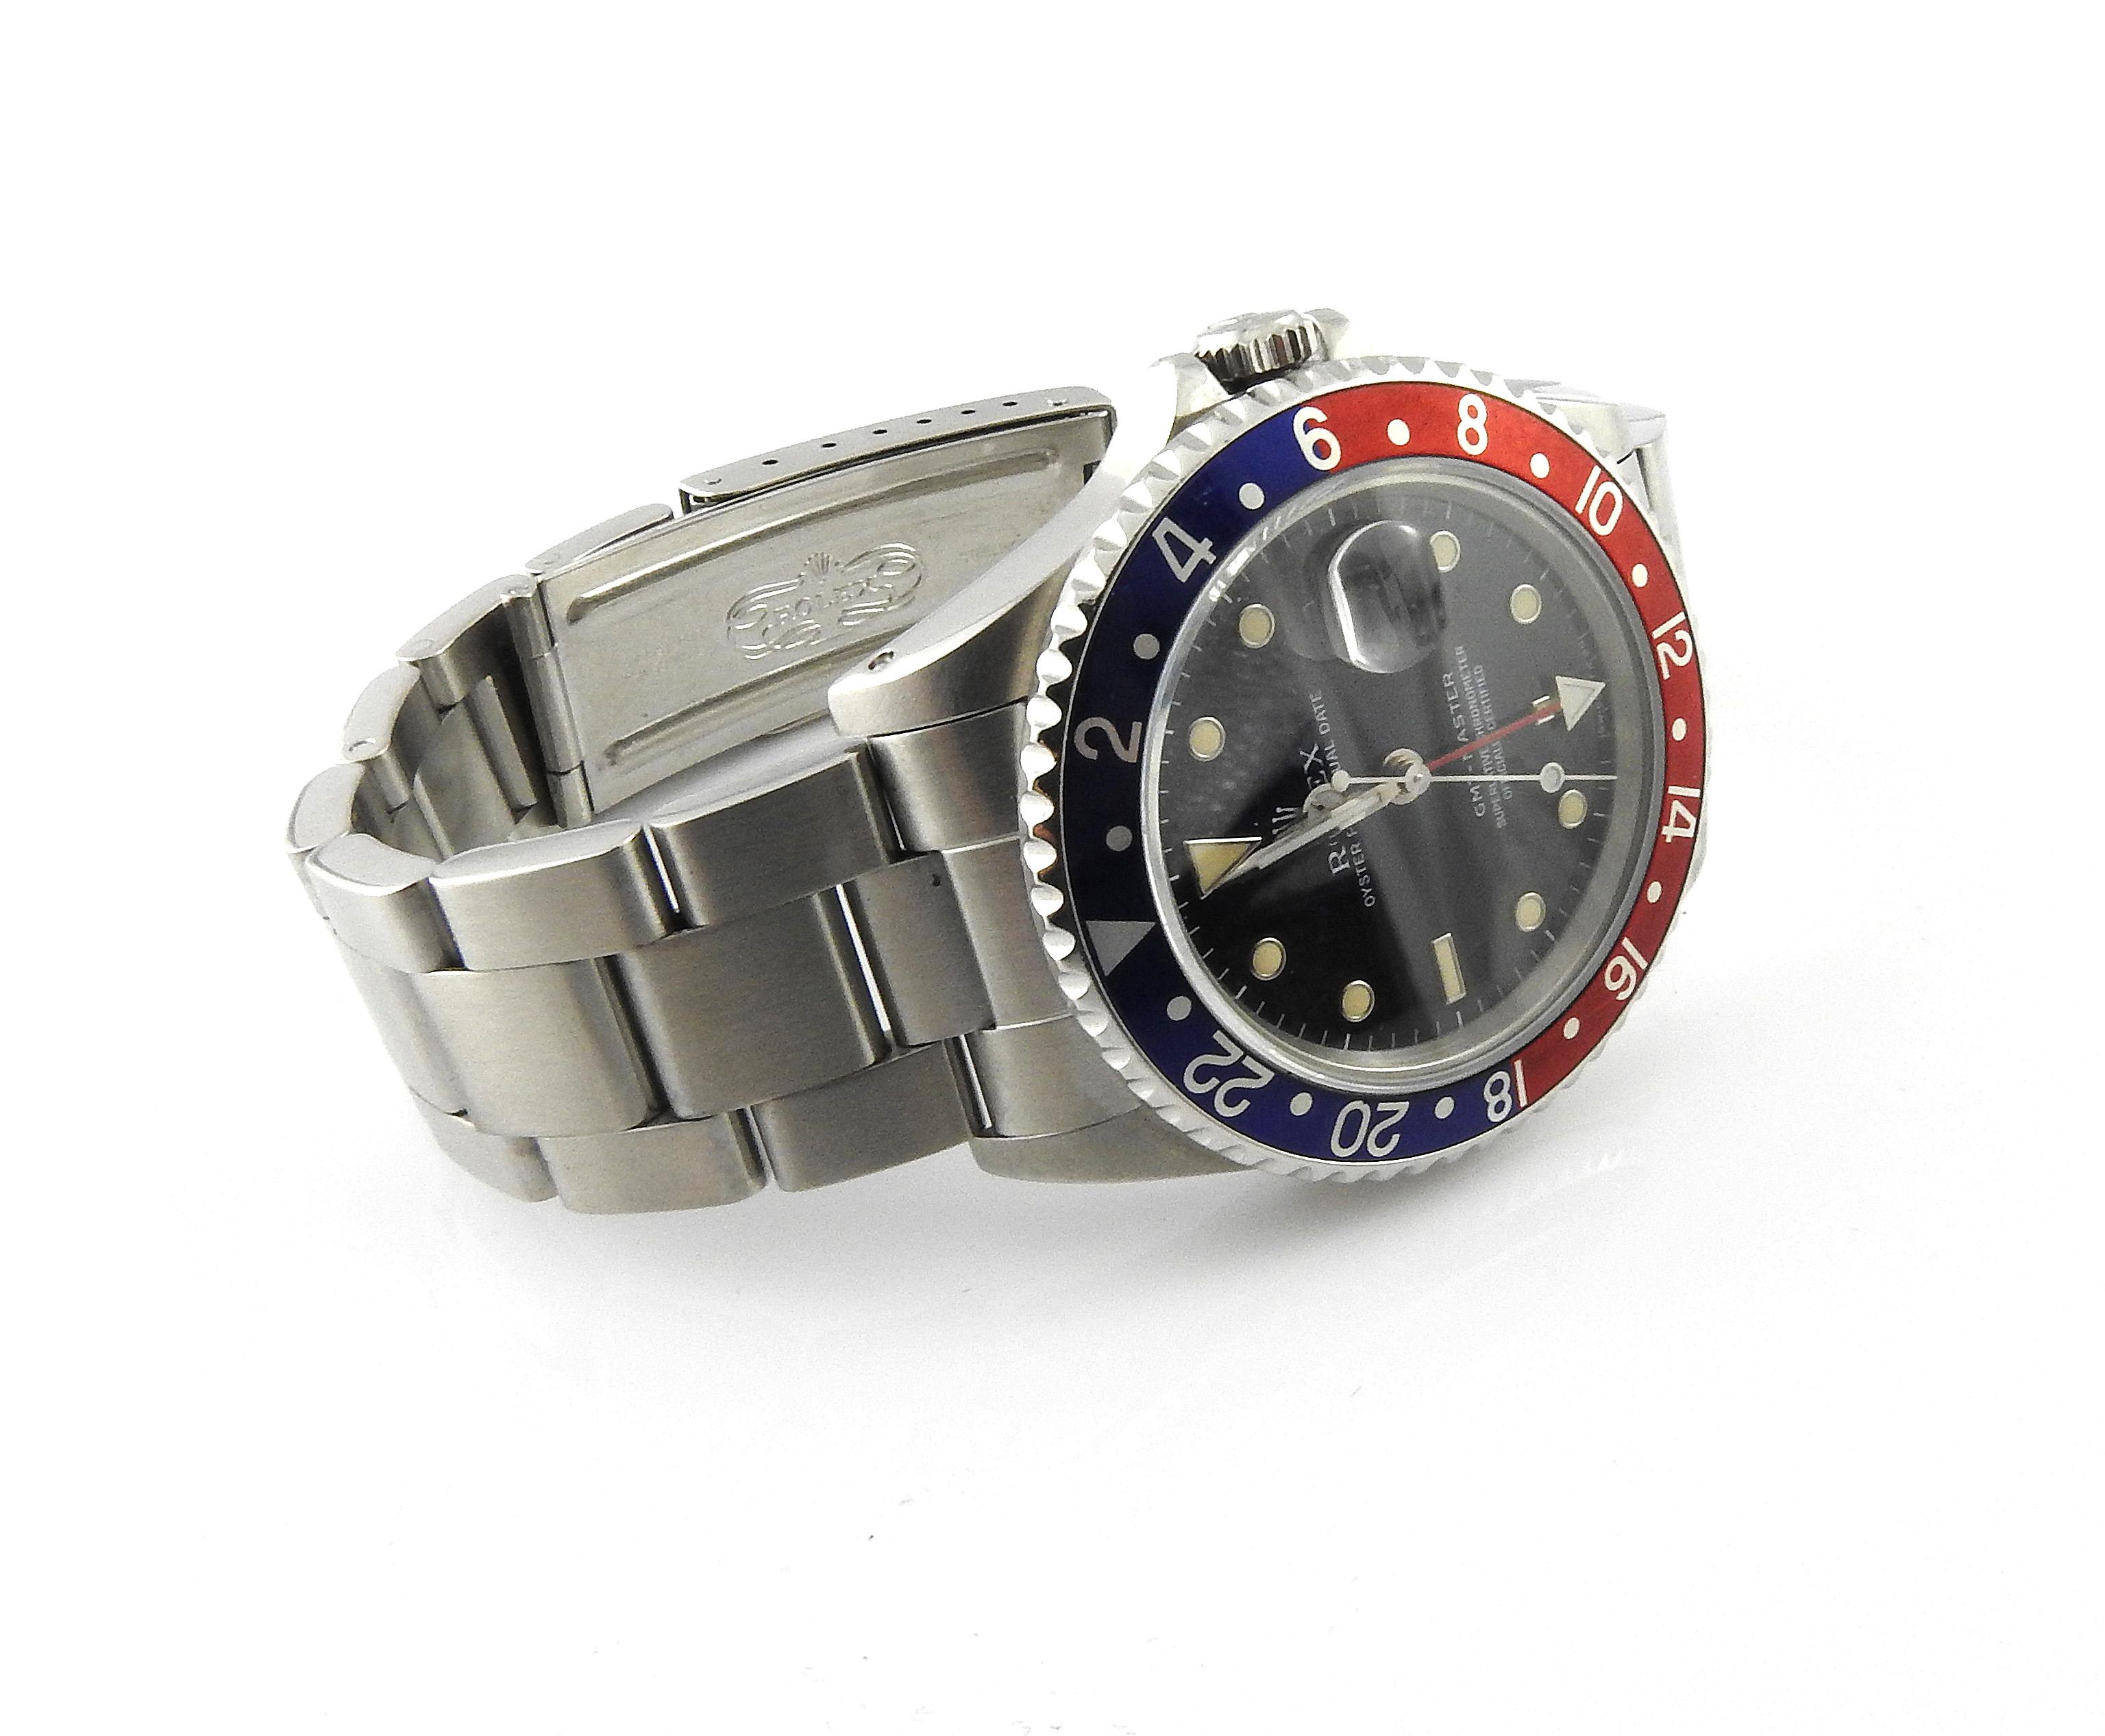 991 Rolex GMT - Master Pepsi Watch

Model: 16700
Serial: N304115

Pepsi bezel - red and blue - original to watch

40 mm stainless steel case

Black Dial

Stainless Steel Oyster Band - 7 3/4